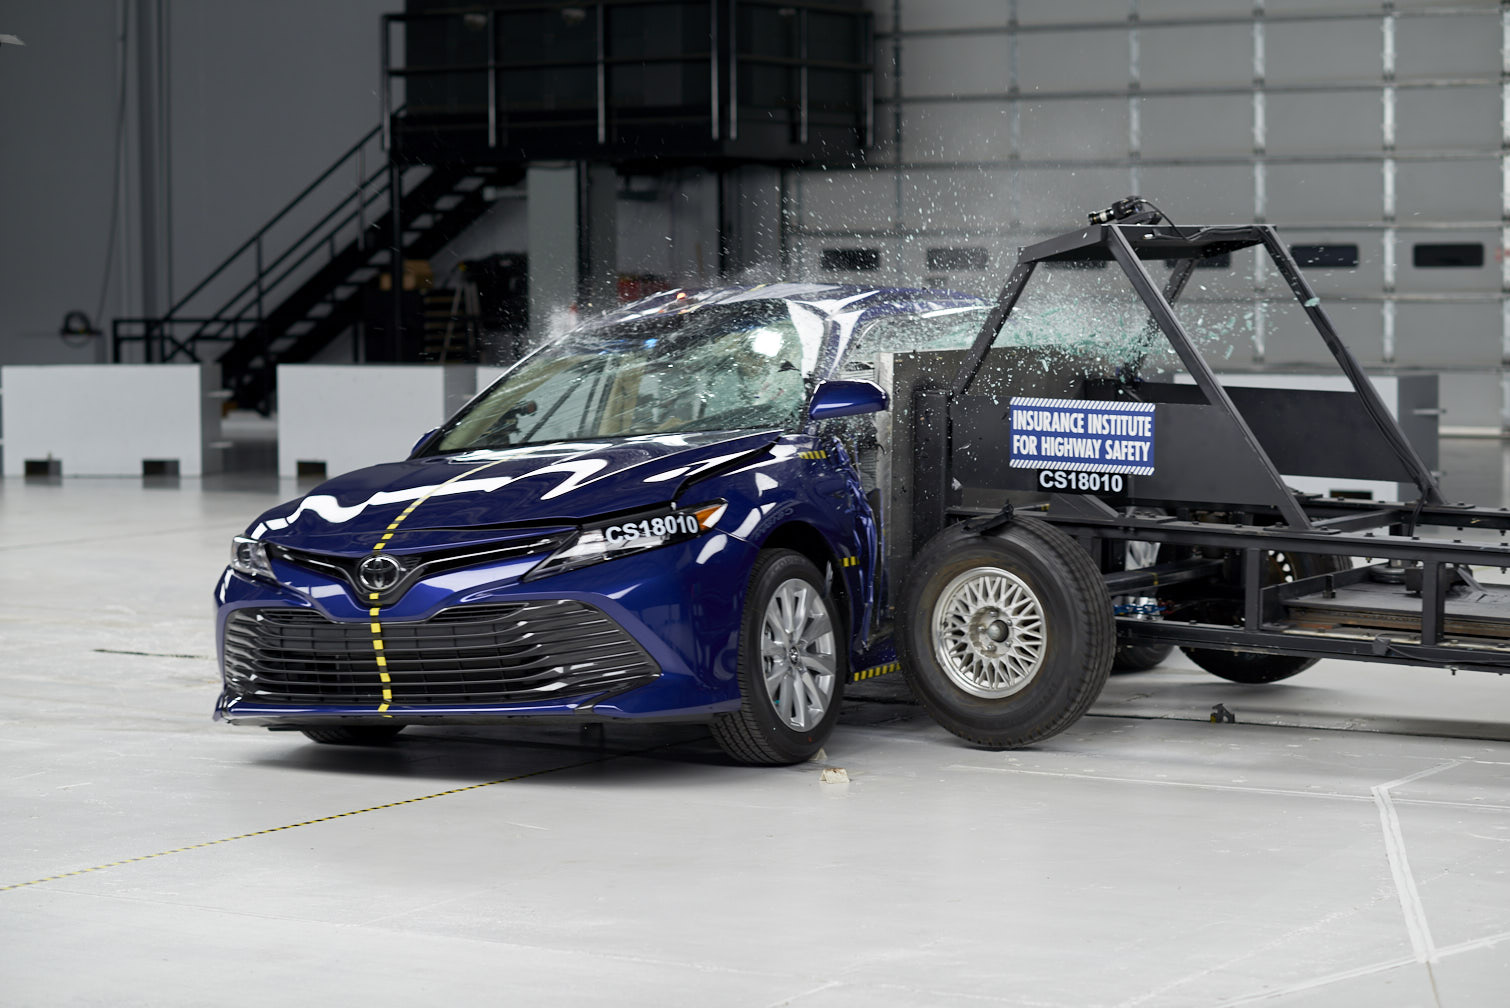 Test vehicle is struck by a movable barrier in a side impact research crash test